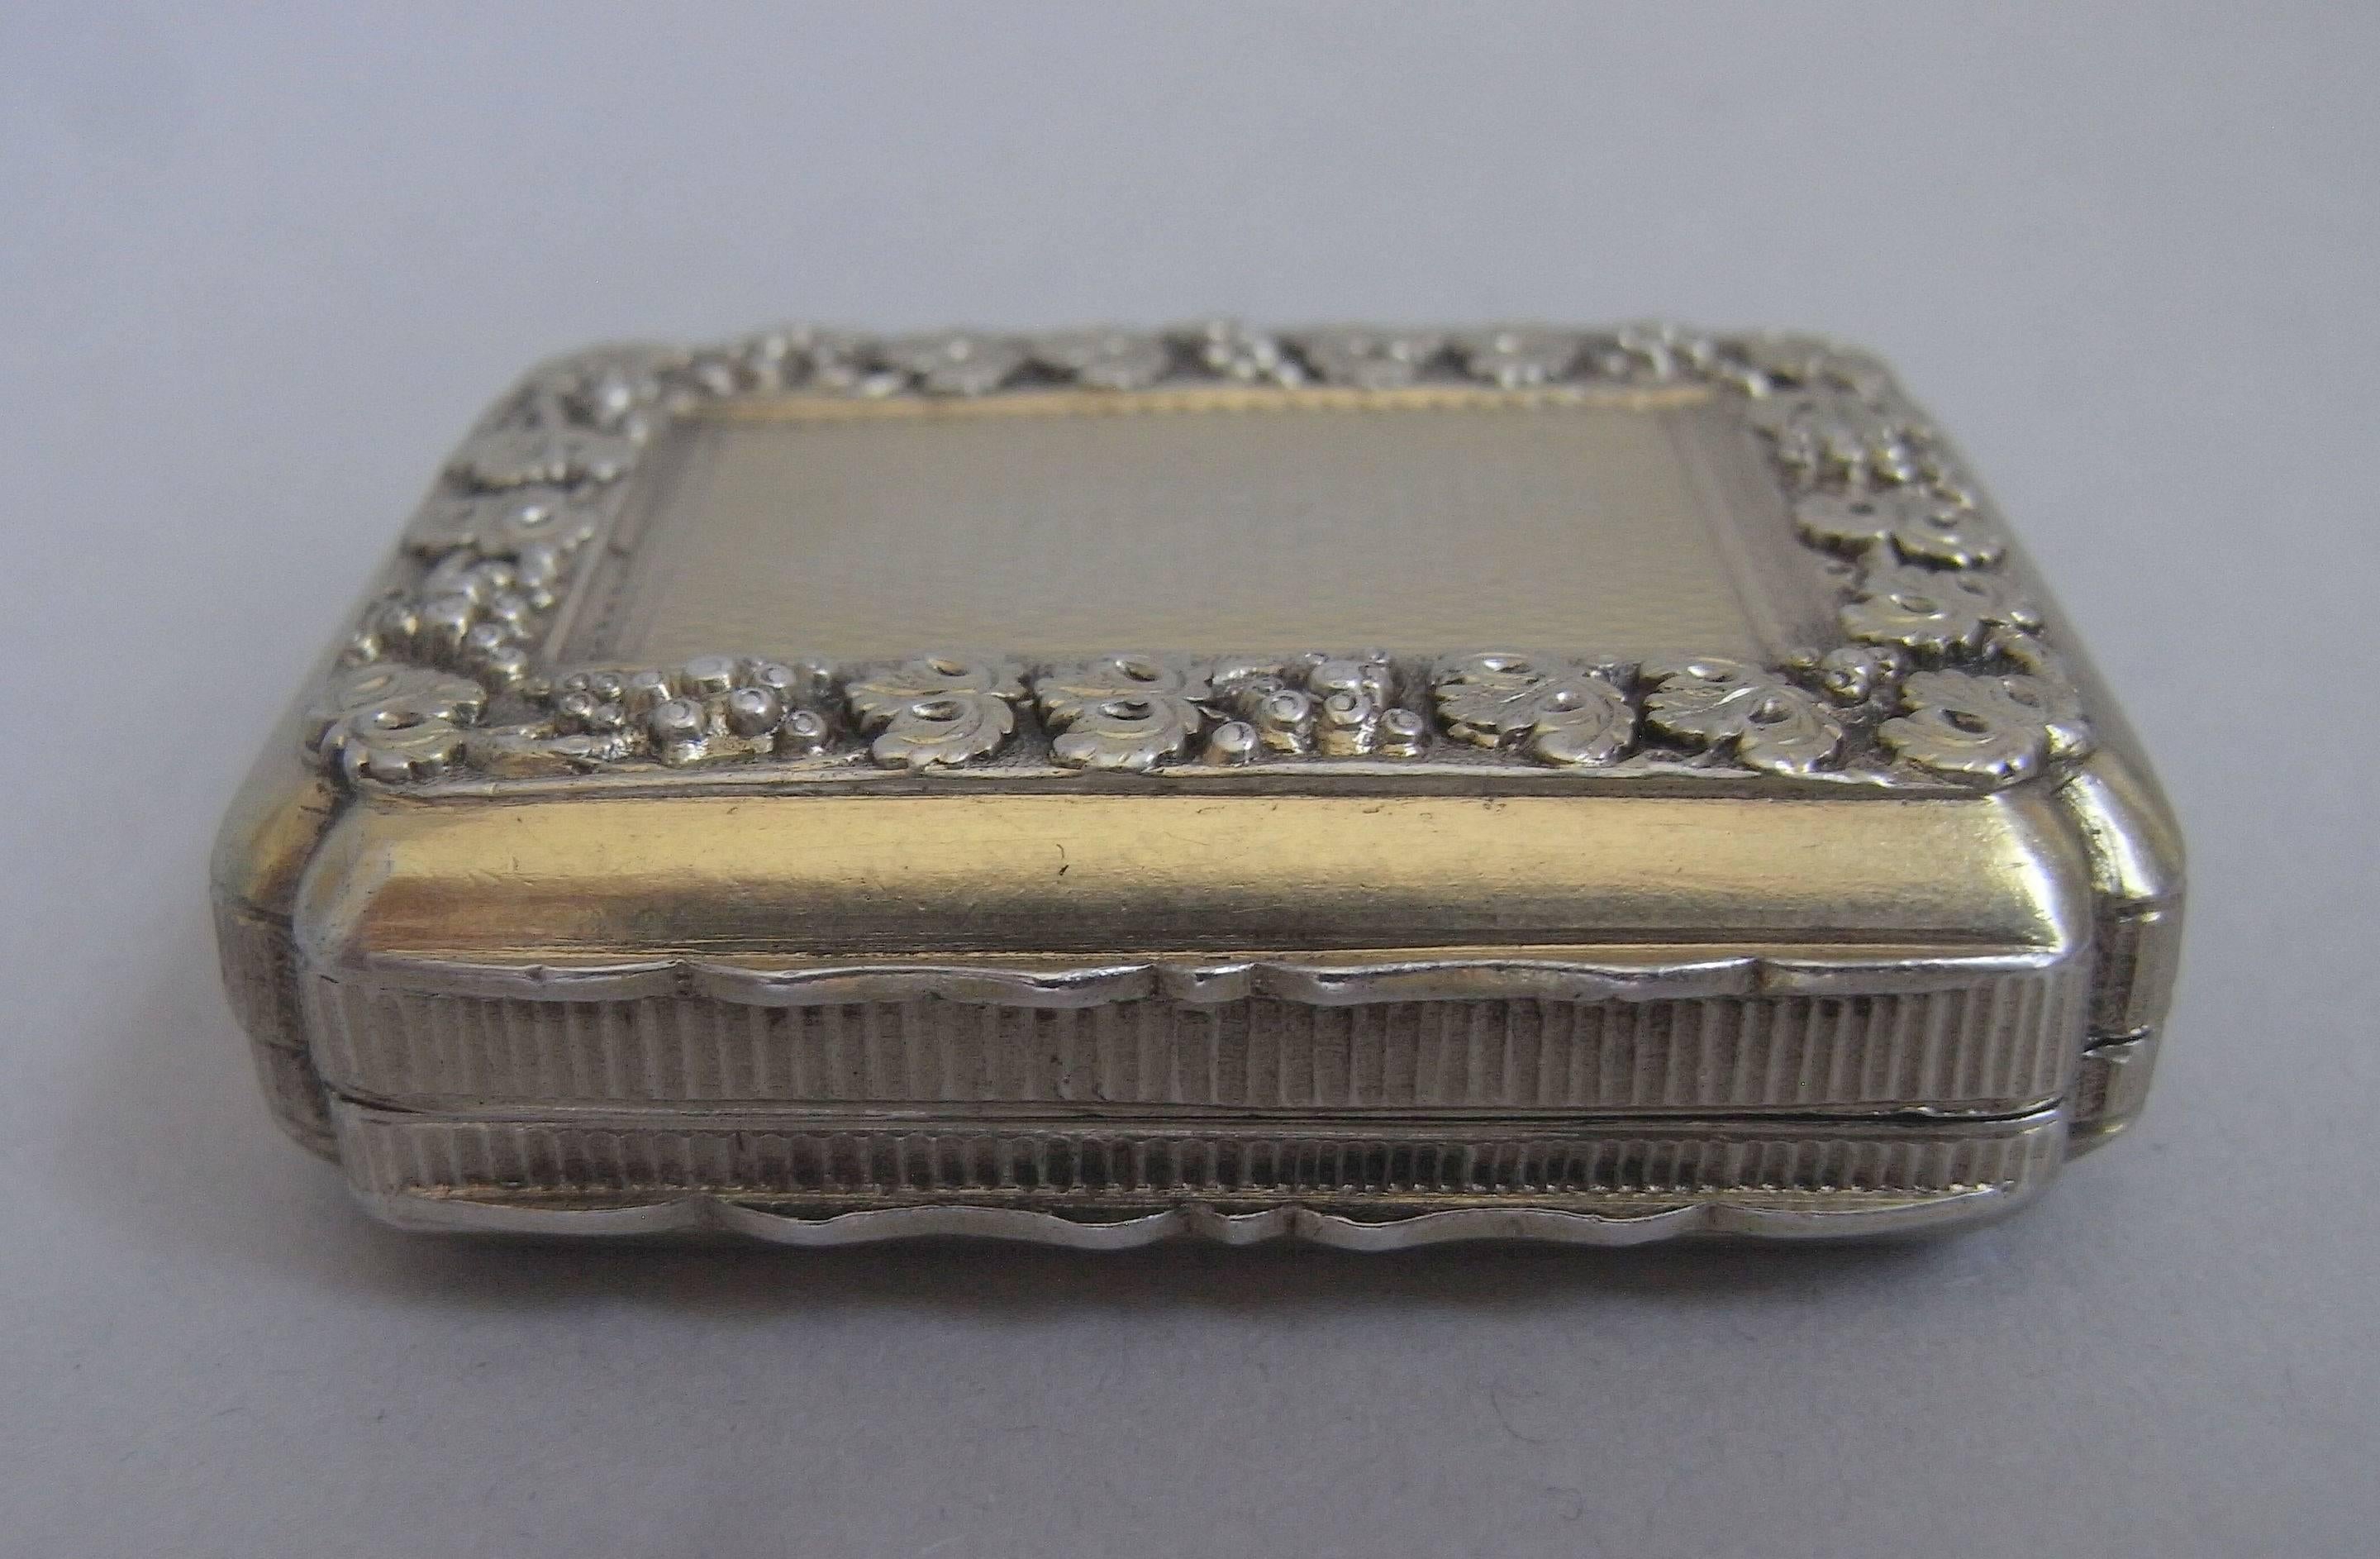 The Vinaigrette is broad rectangular in form, with incuse corners. The cover is most unusually decorated with an outer border of raised trailing vines and grapes, surrounding an engine turned panel. The sides display a serpentine shaped thumb piece